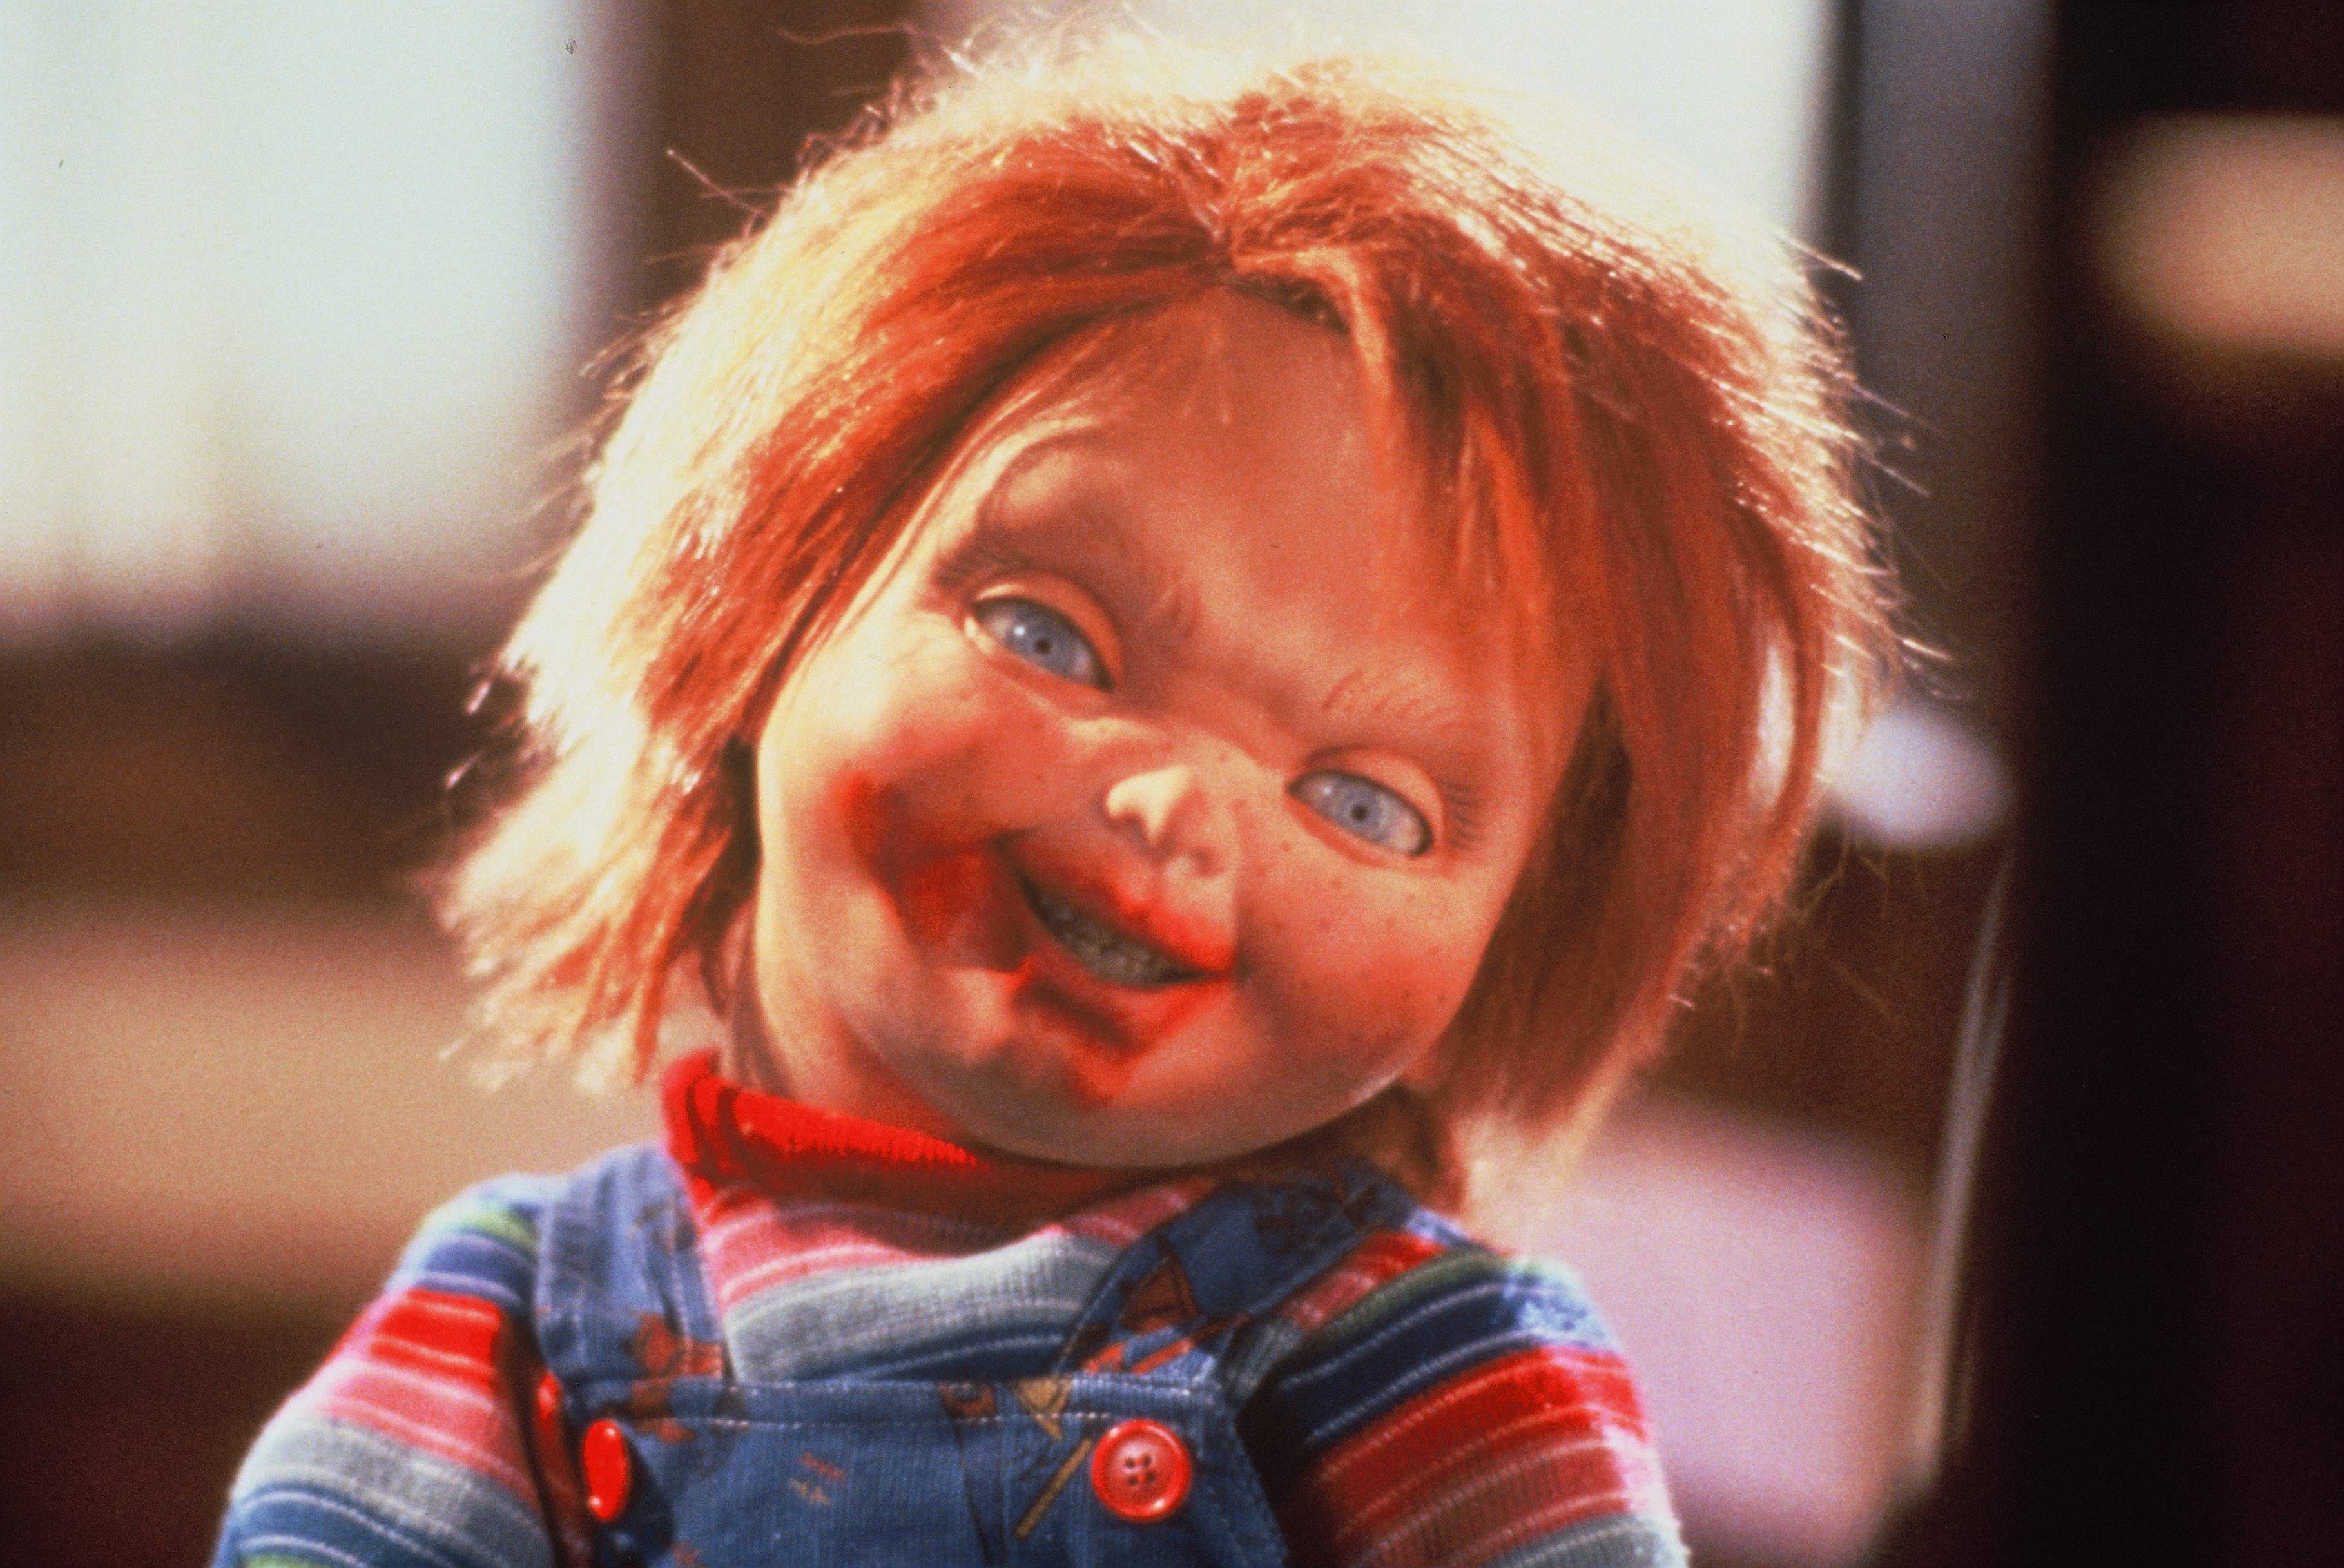 High Resolution Wallpaper | Child's Play 3 3637x2433 px